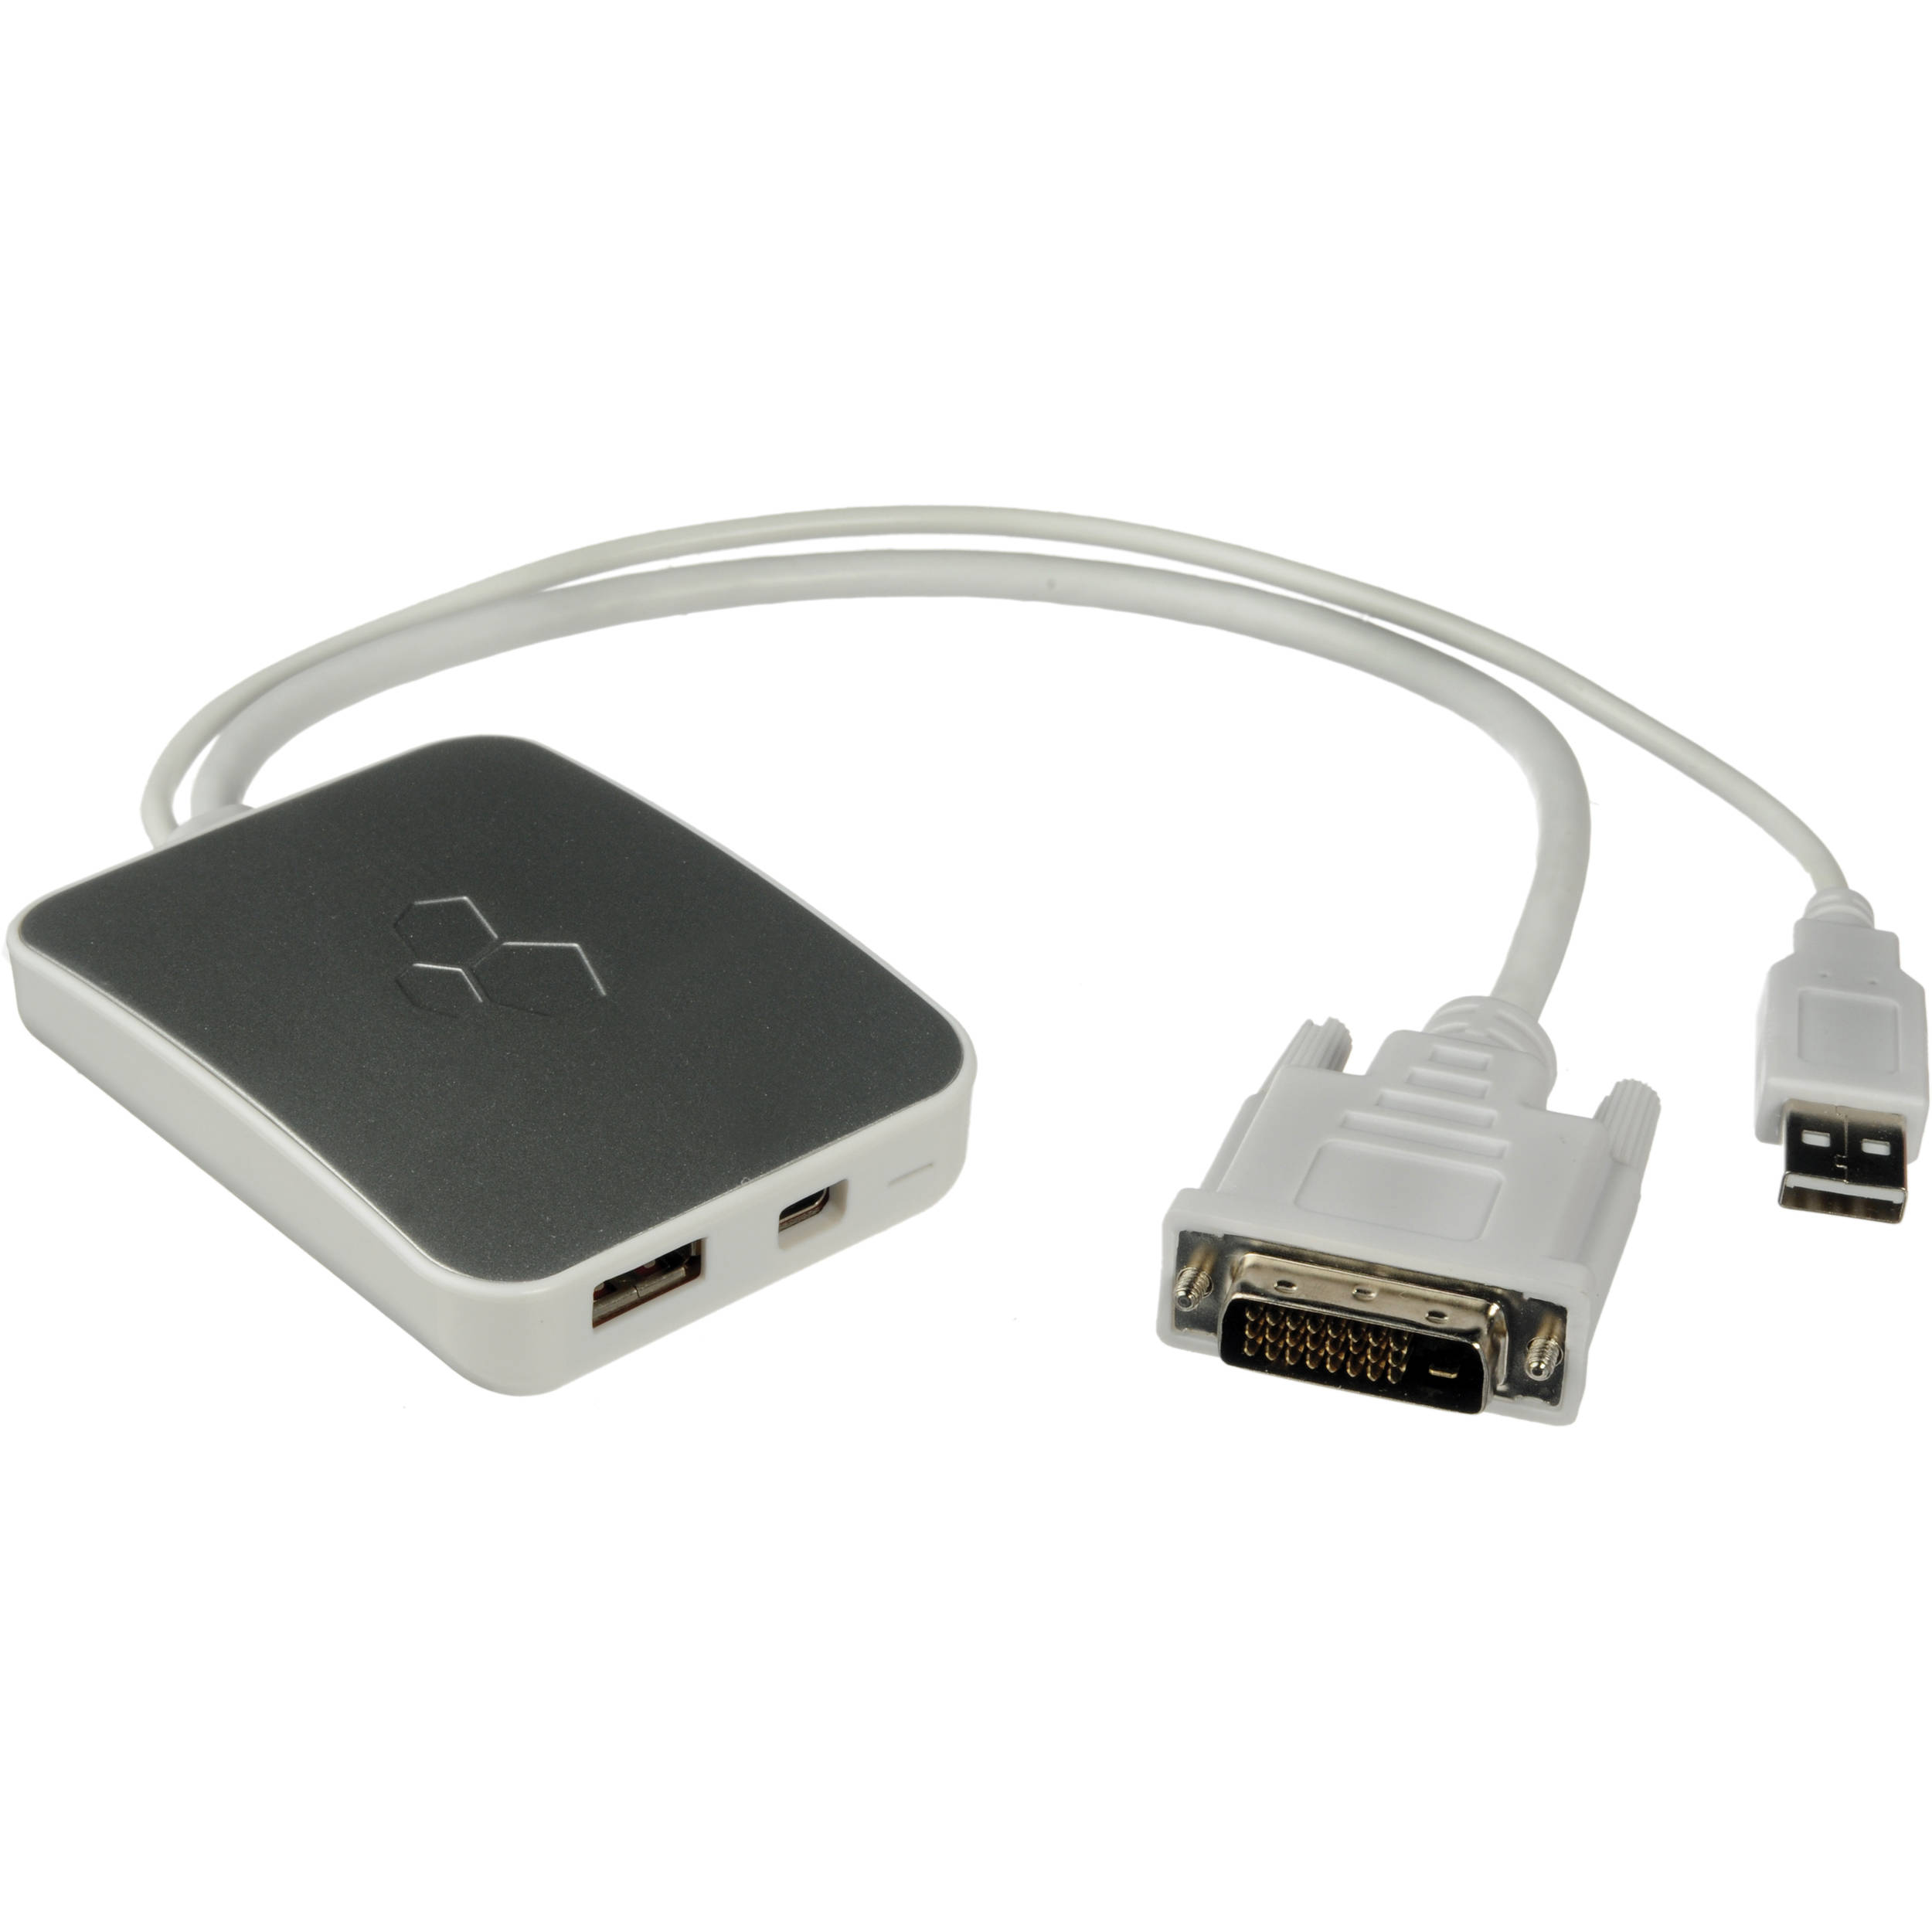 Hdmi to usb adapter for mac